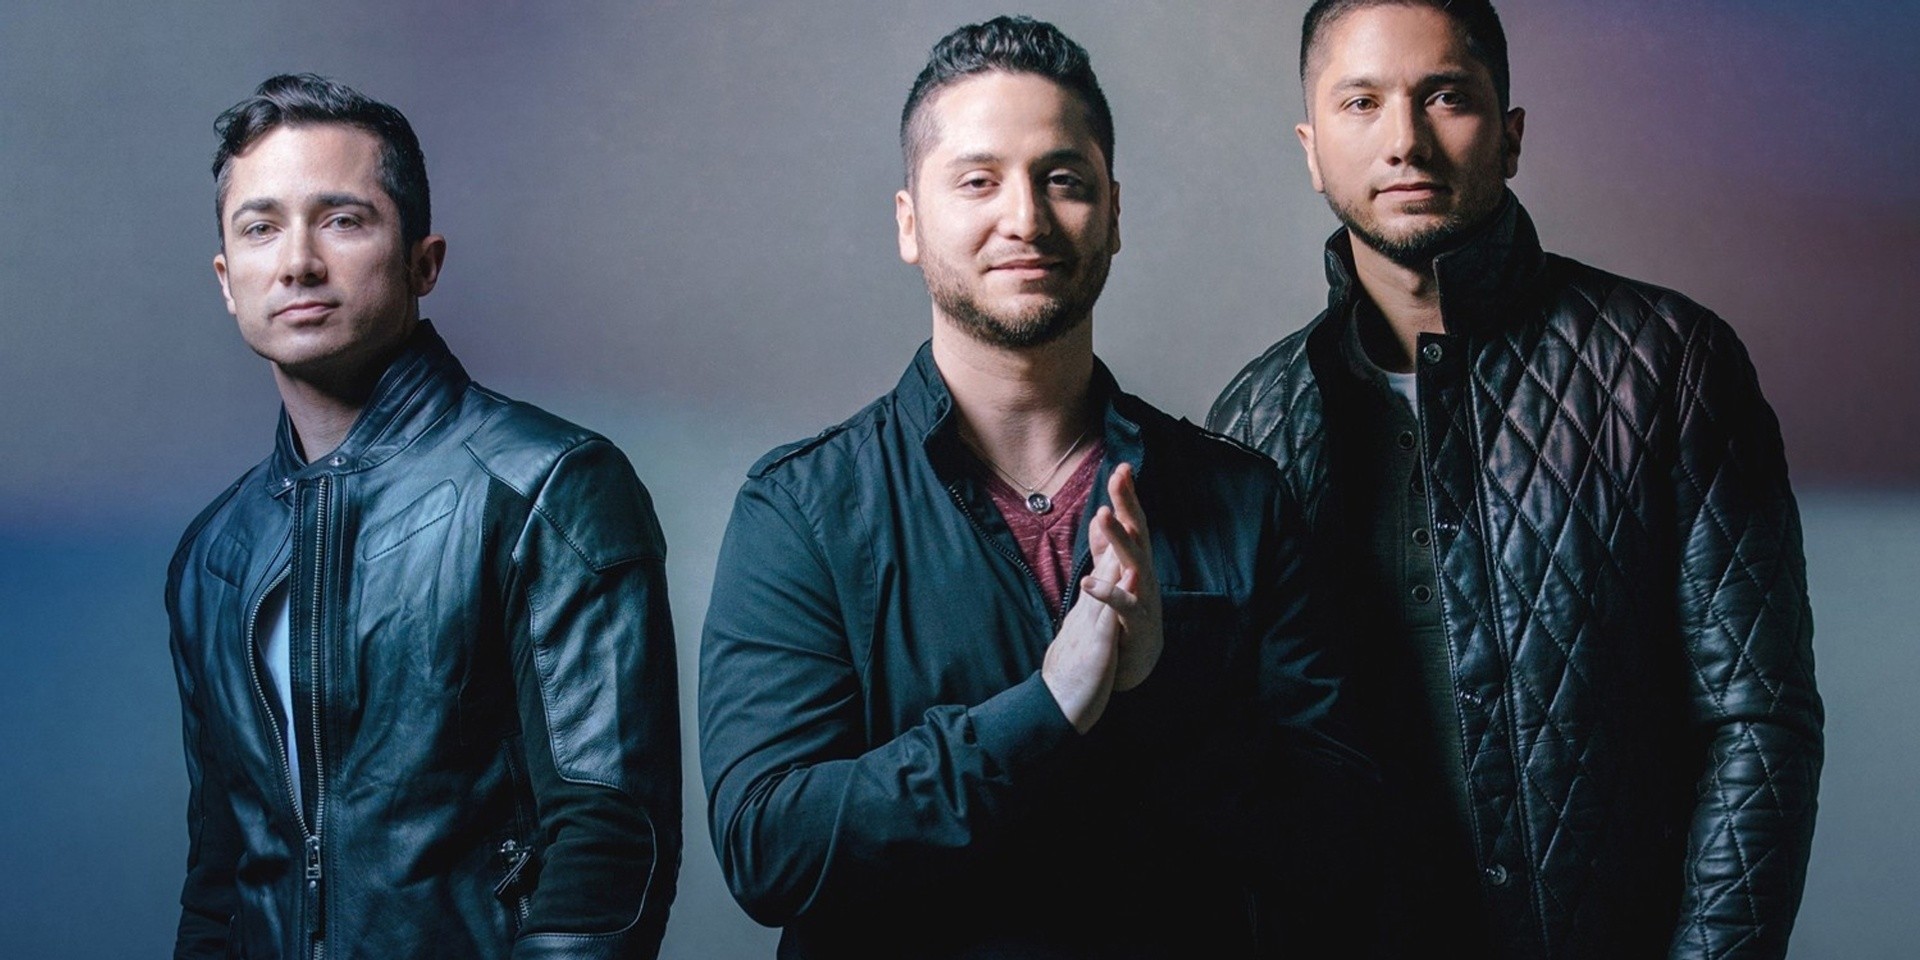 Boyce Avenue to share the stage with December Avenue and I Belong to the Zoo in 2020